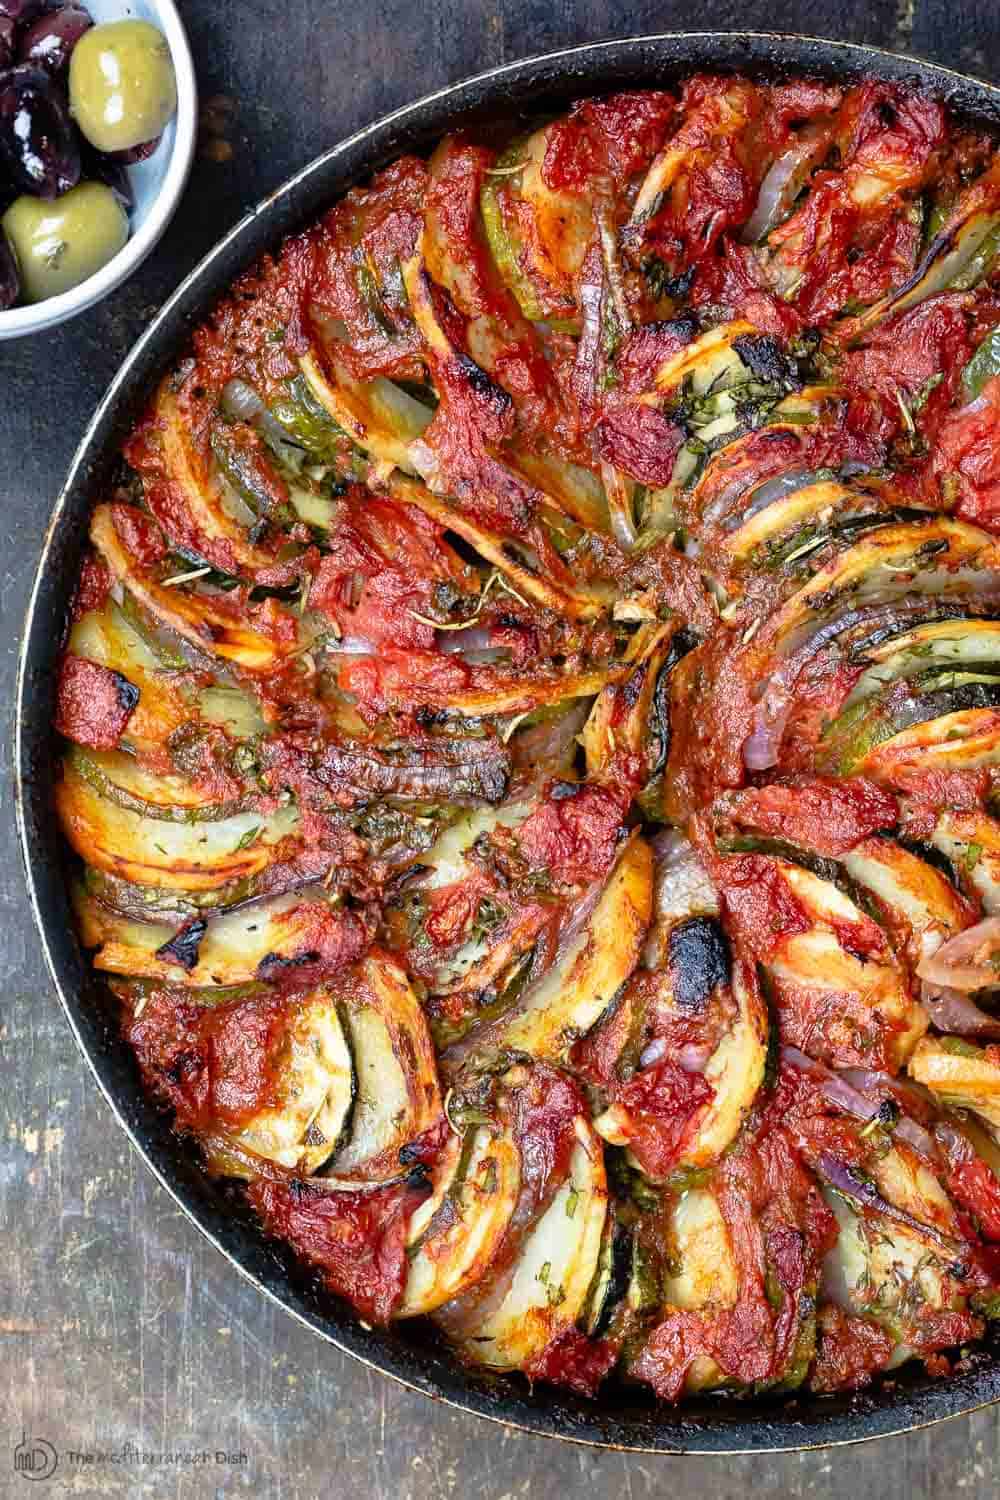 Briam. Traditional Greek Roasted Vegetables with potatoes, zucchini, red onions, tomatoes and extra virgin olive oil